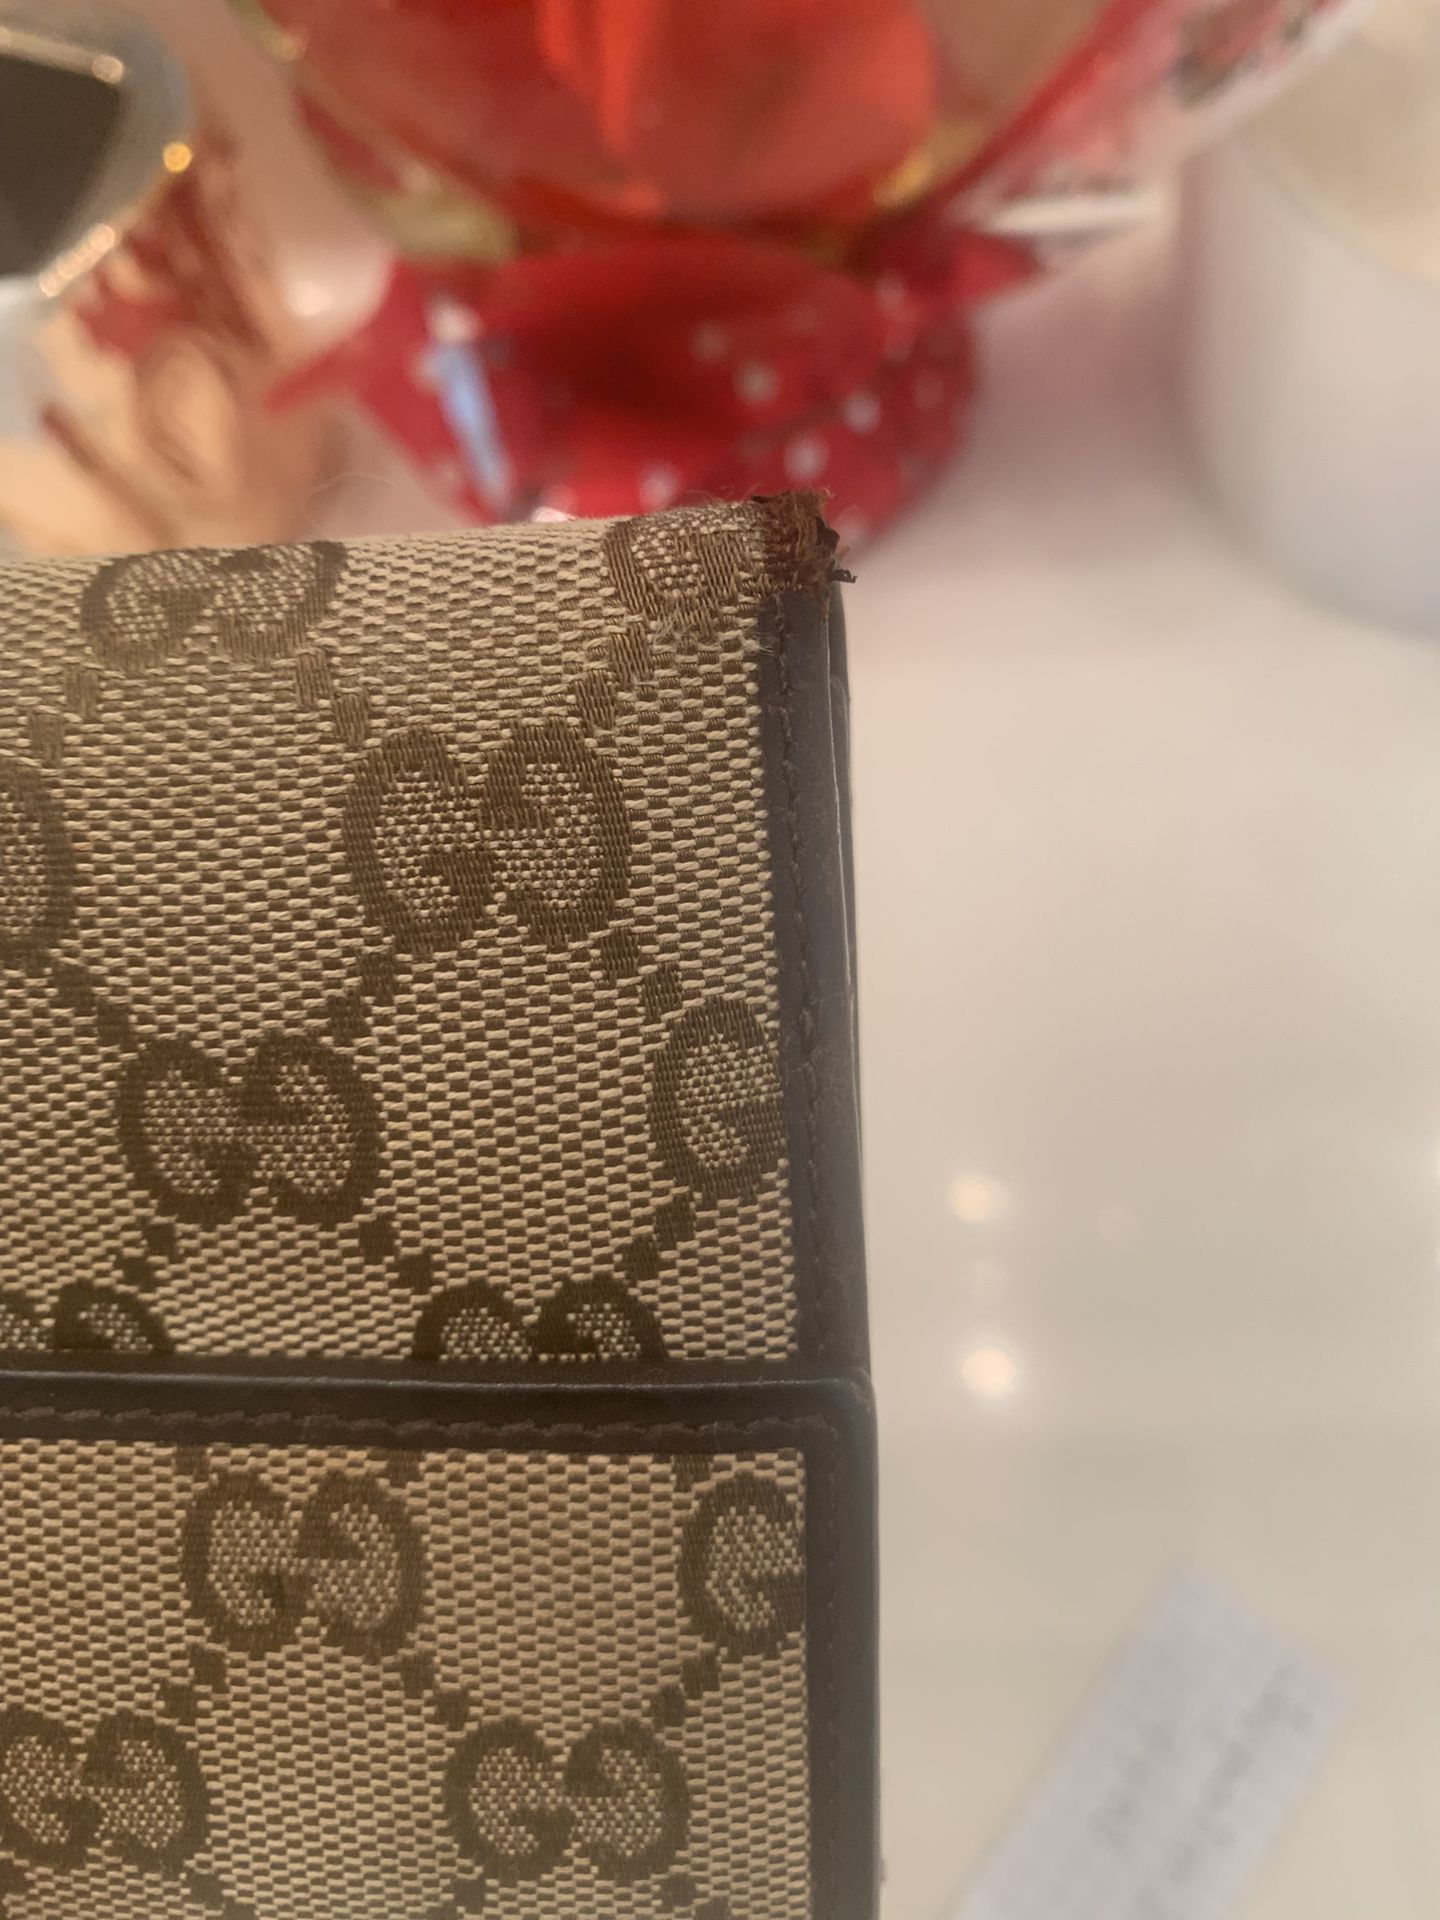 Gucci Tiger GG Wallet for Sale in Levittown, NY - OfferUp